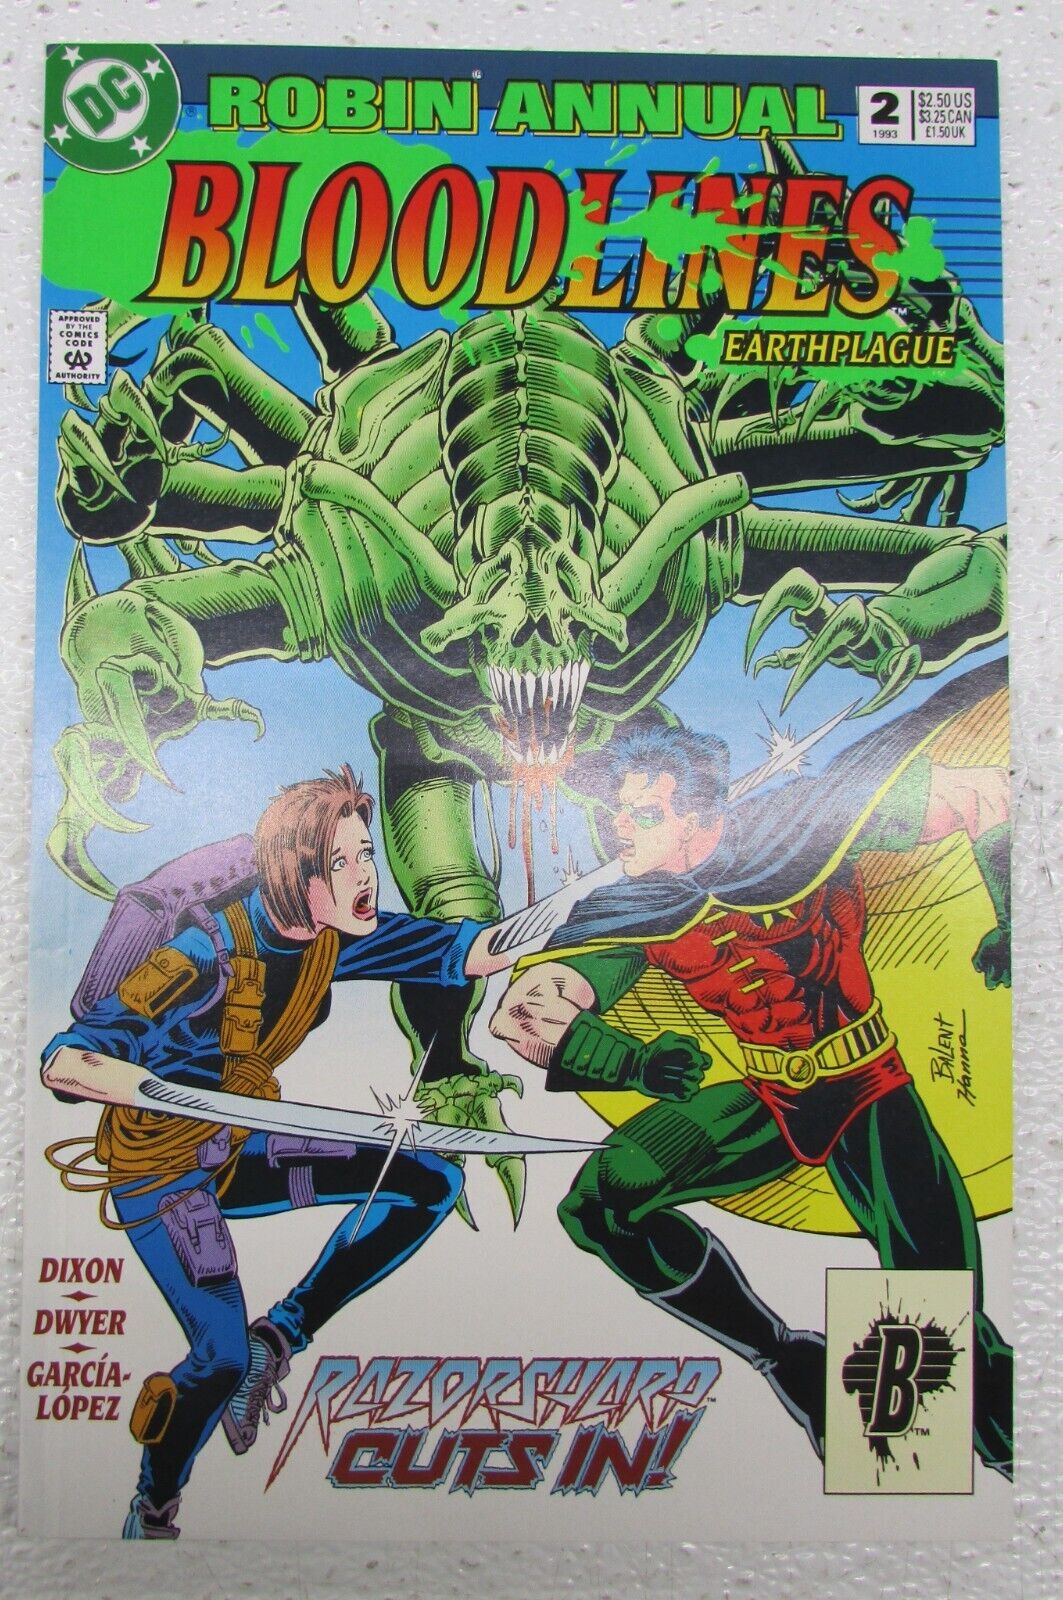 DC COMIC BOOK ROBIN 1993 ANNUAL BLOODLINES EARTHPLAGUE #2